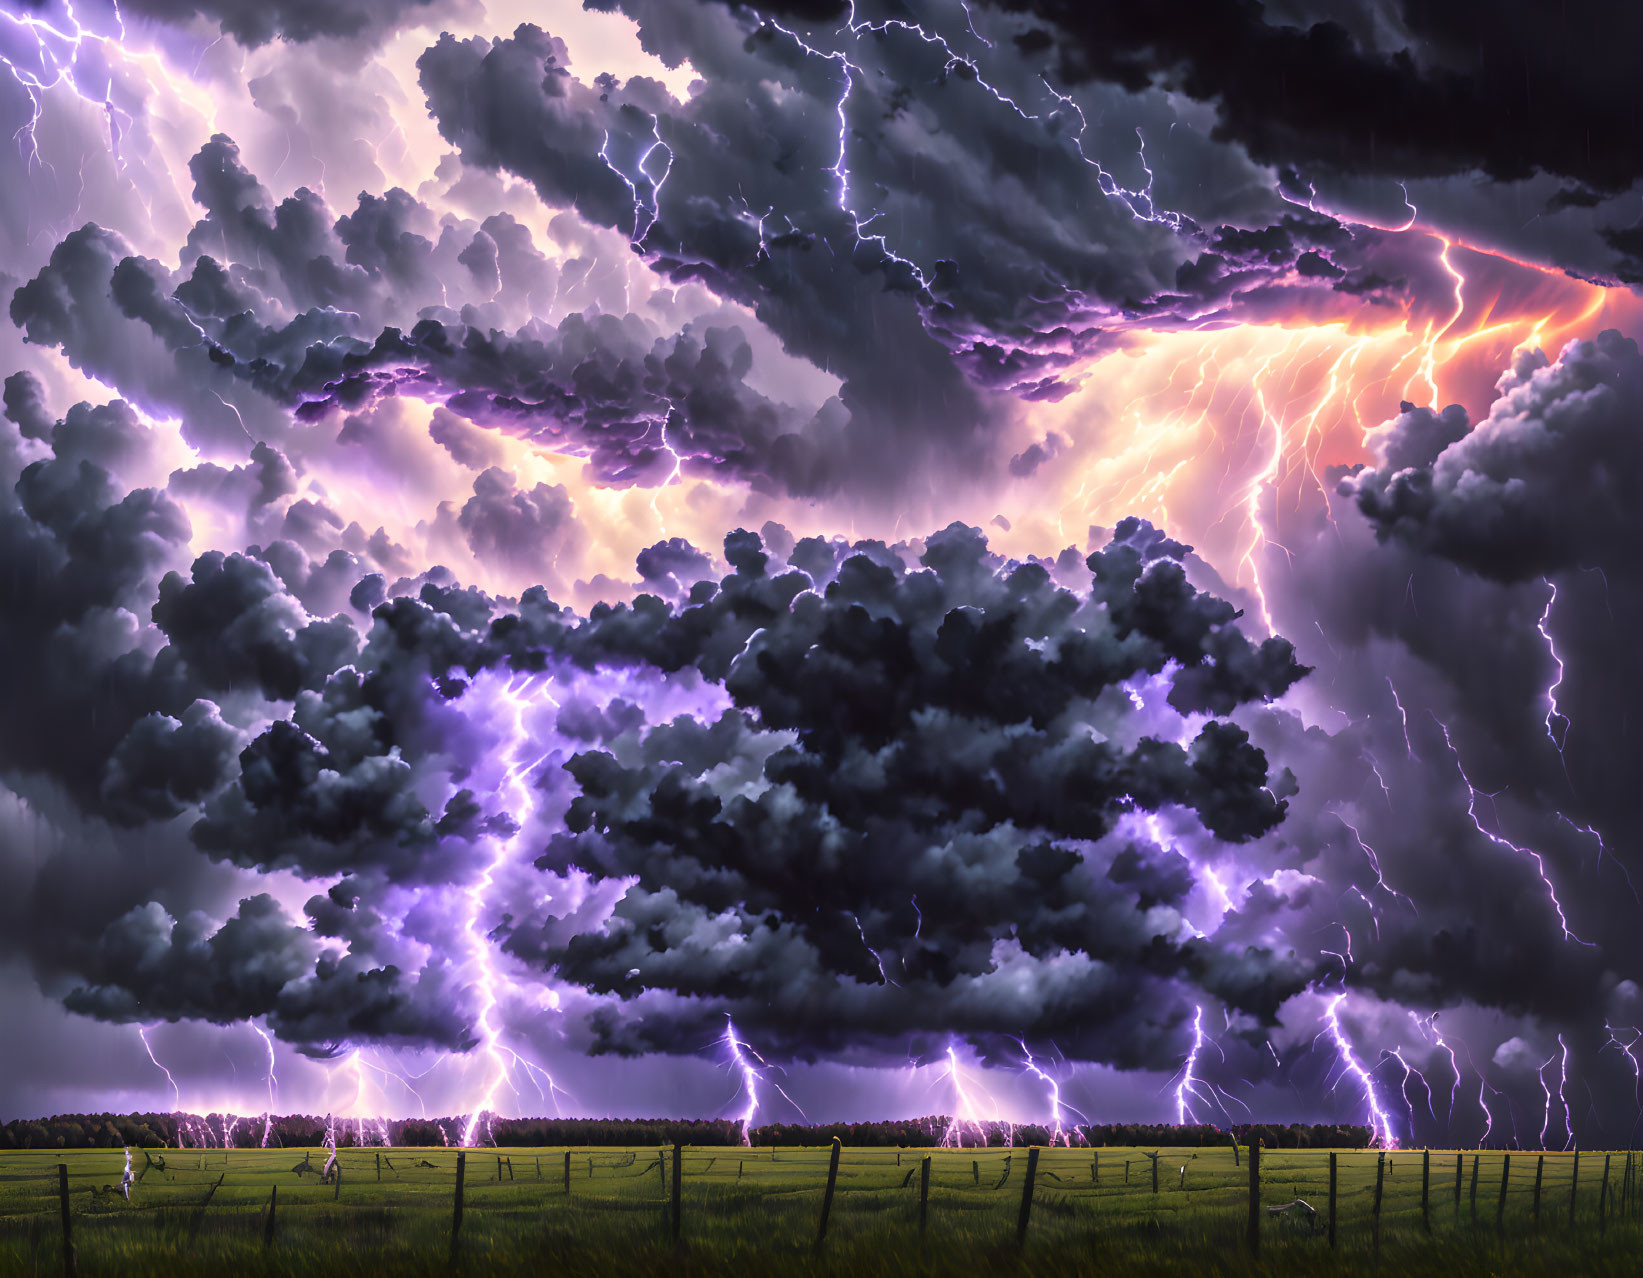 Dramatic thunderstorm with purple and pink lightning bolts over rural landscape